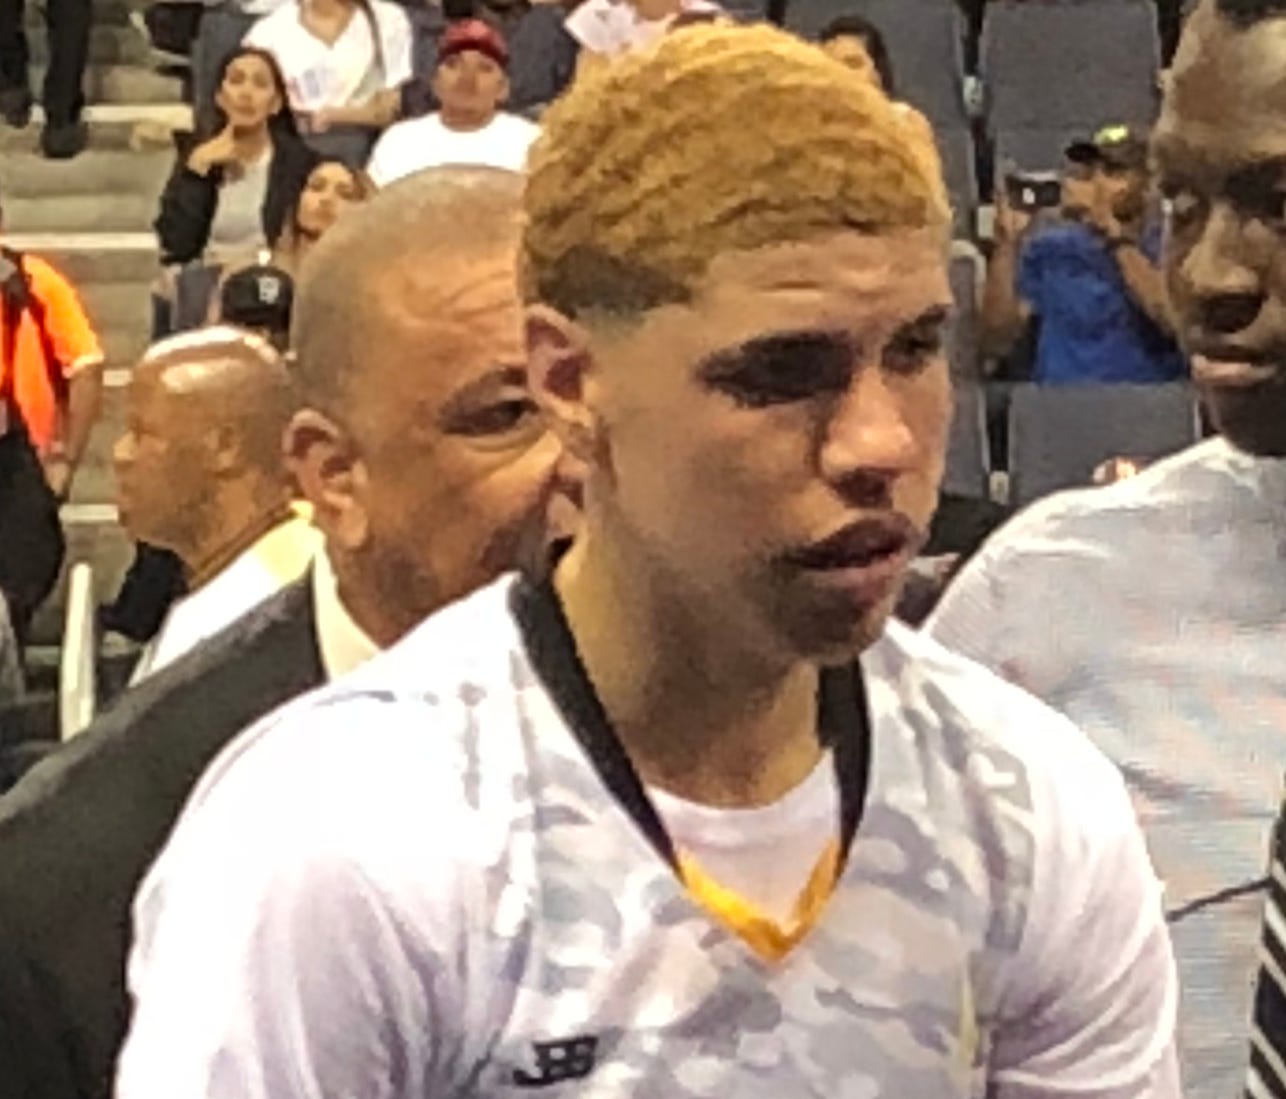 LaMelo Ball is 3-for-32 (9.3 percent) from 3-point range in the JBA.